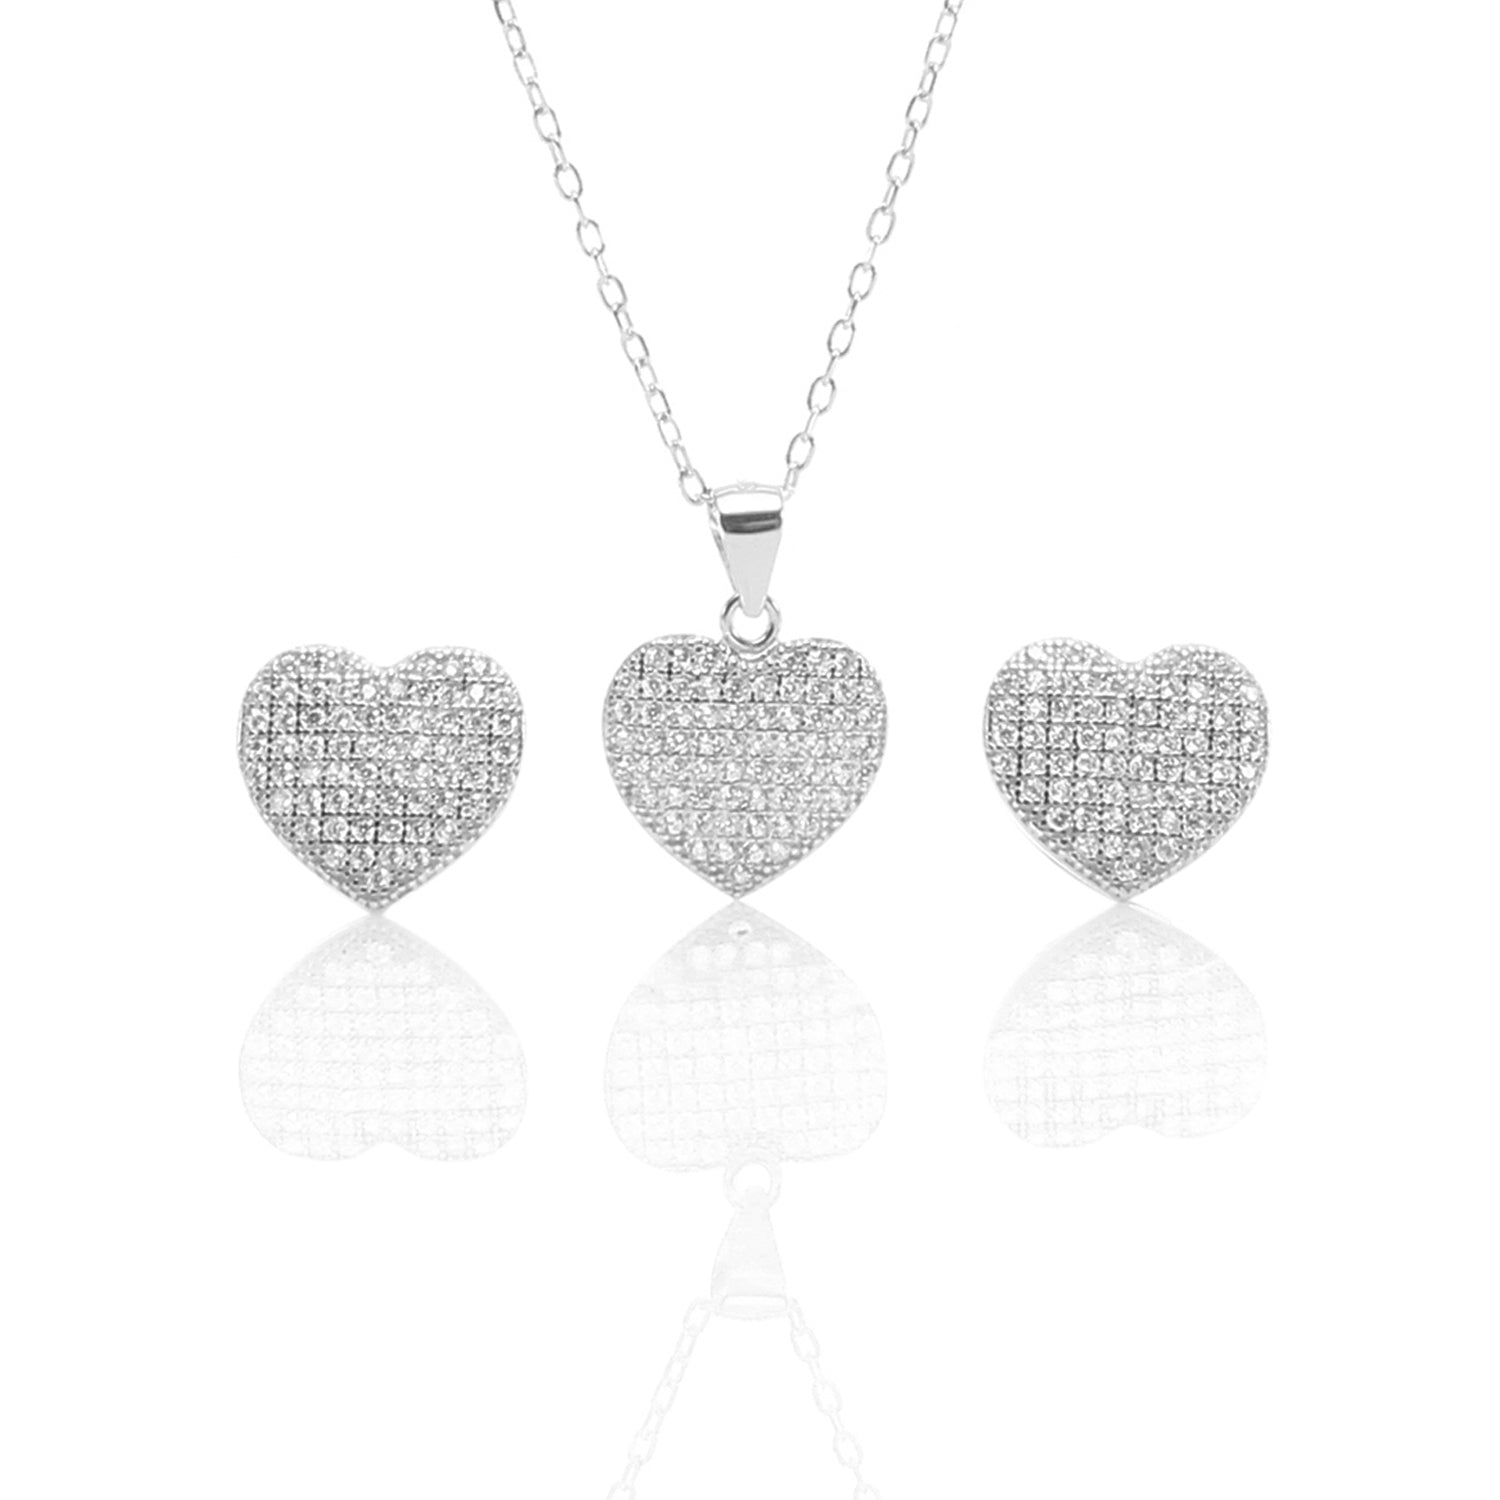 Heart Shaped Pendant Necklace and Earring Set - ARJW1009RD ARCADIO